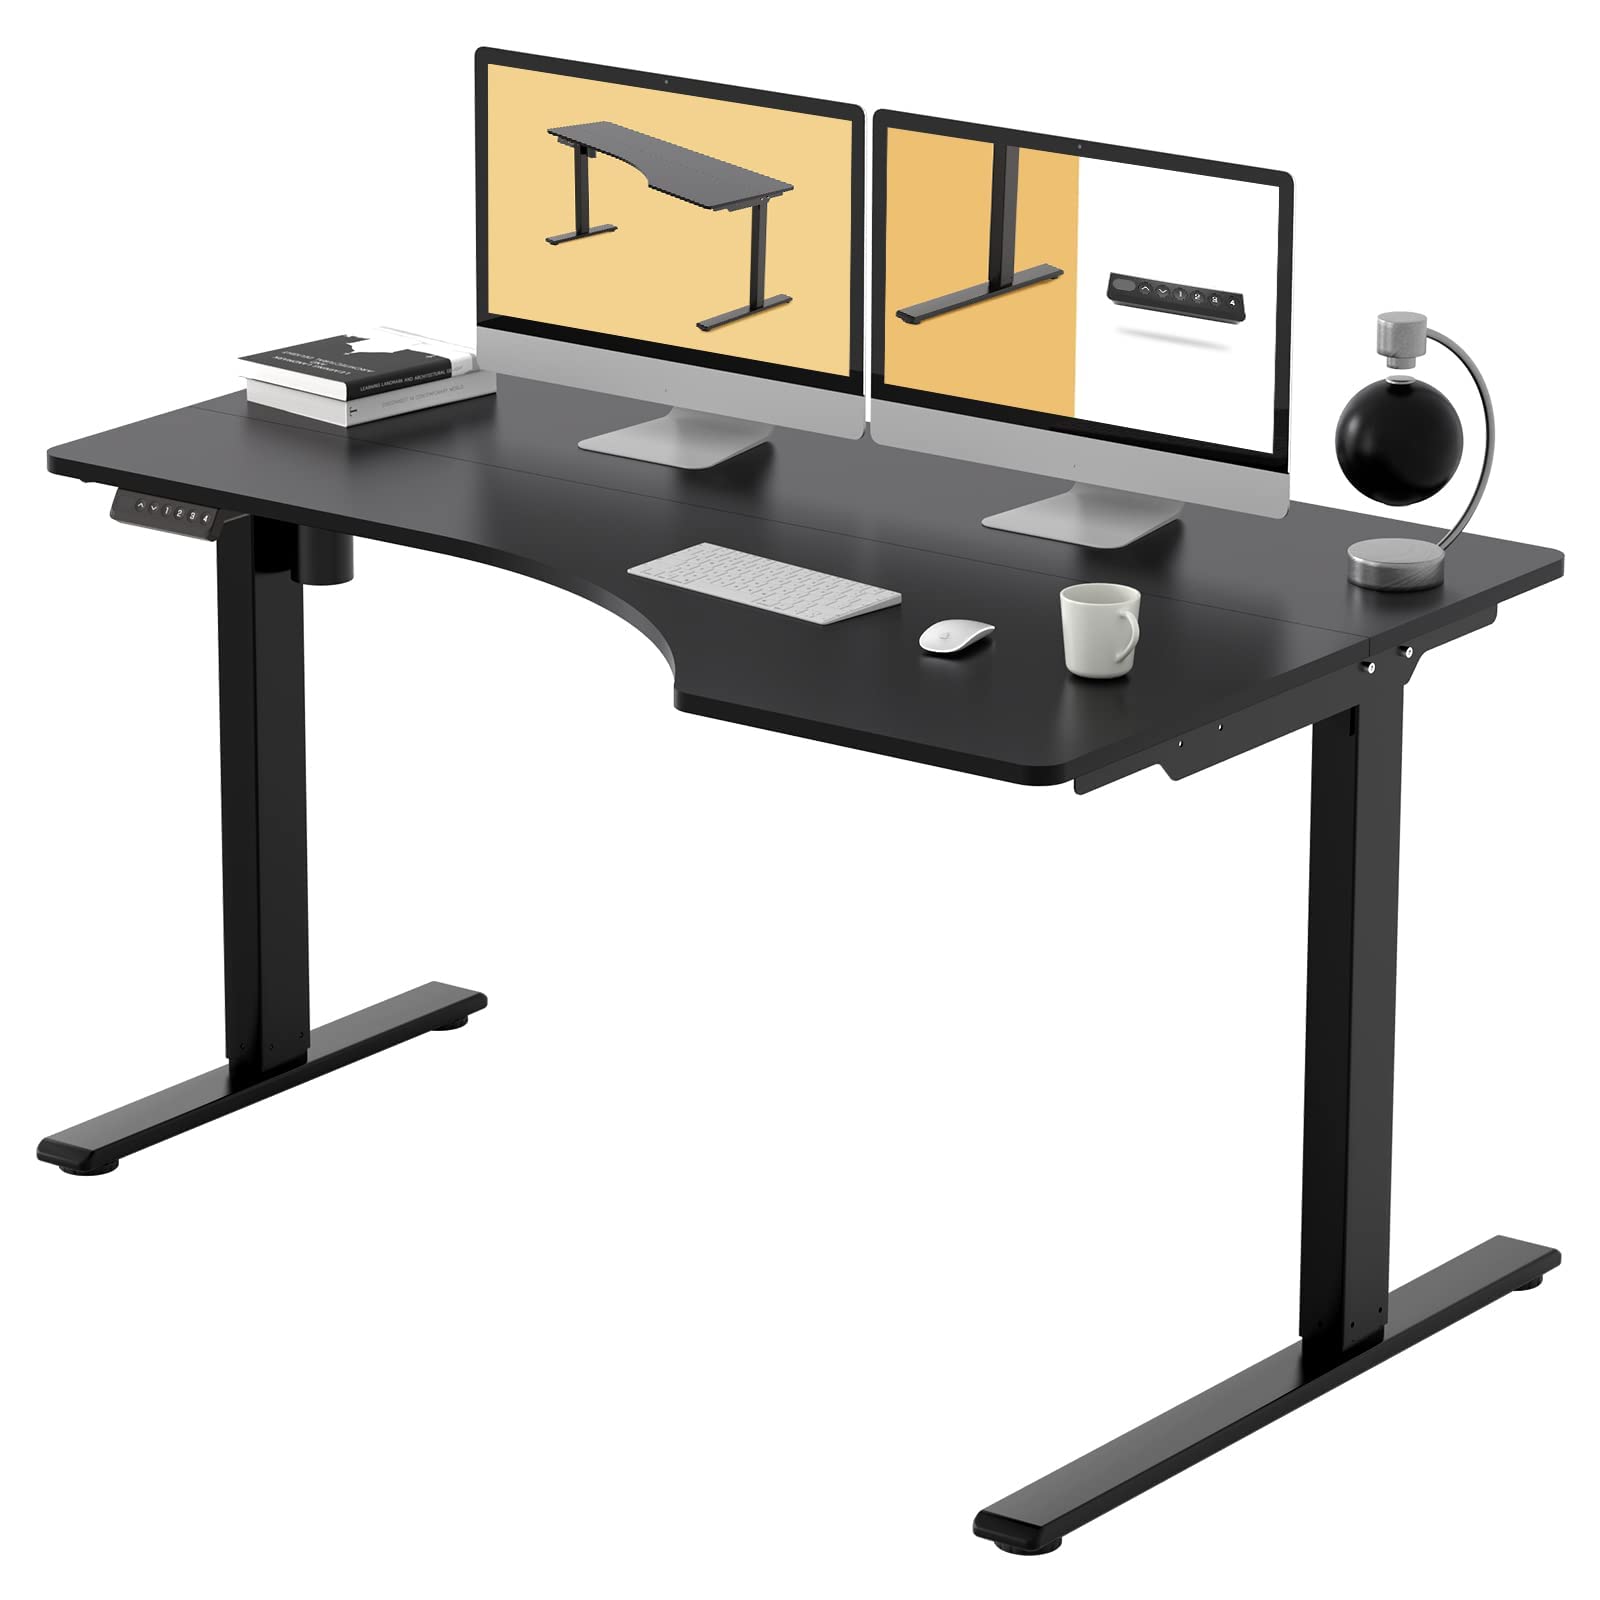 FLEXISPOT EF1L Essential 55 in L Shaped Adjustable Height Desk Electric with Memory Controller (Black Frame + Black Desktop) with 30% off - $139.99 + Free Shipping